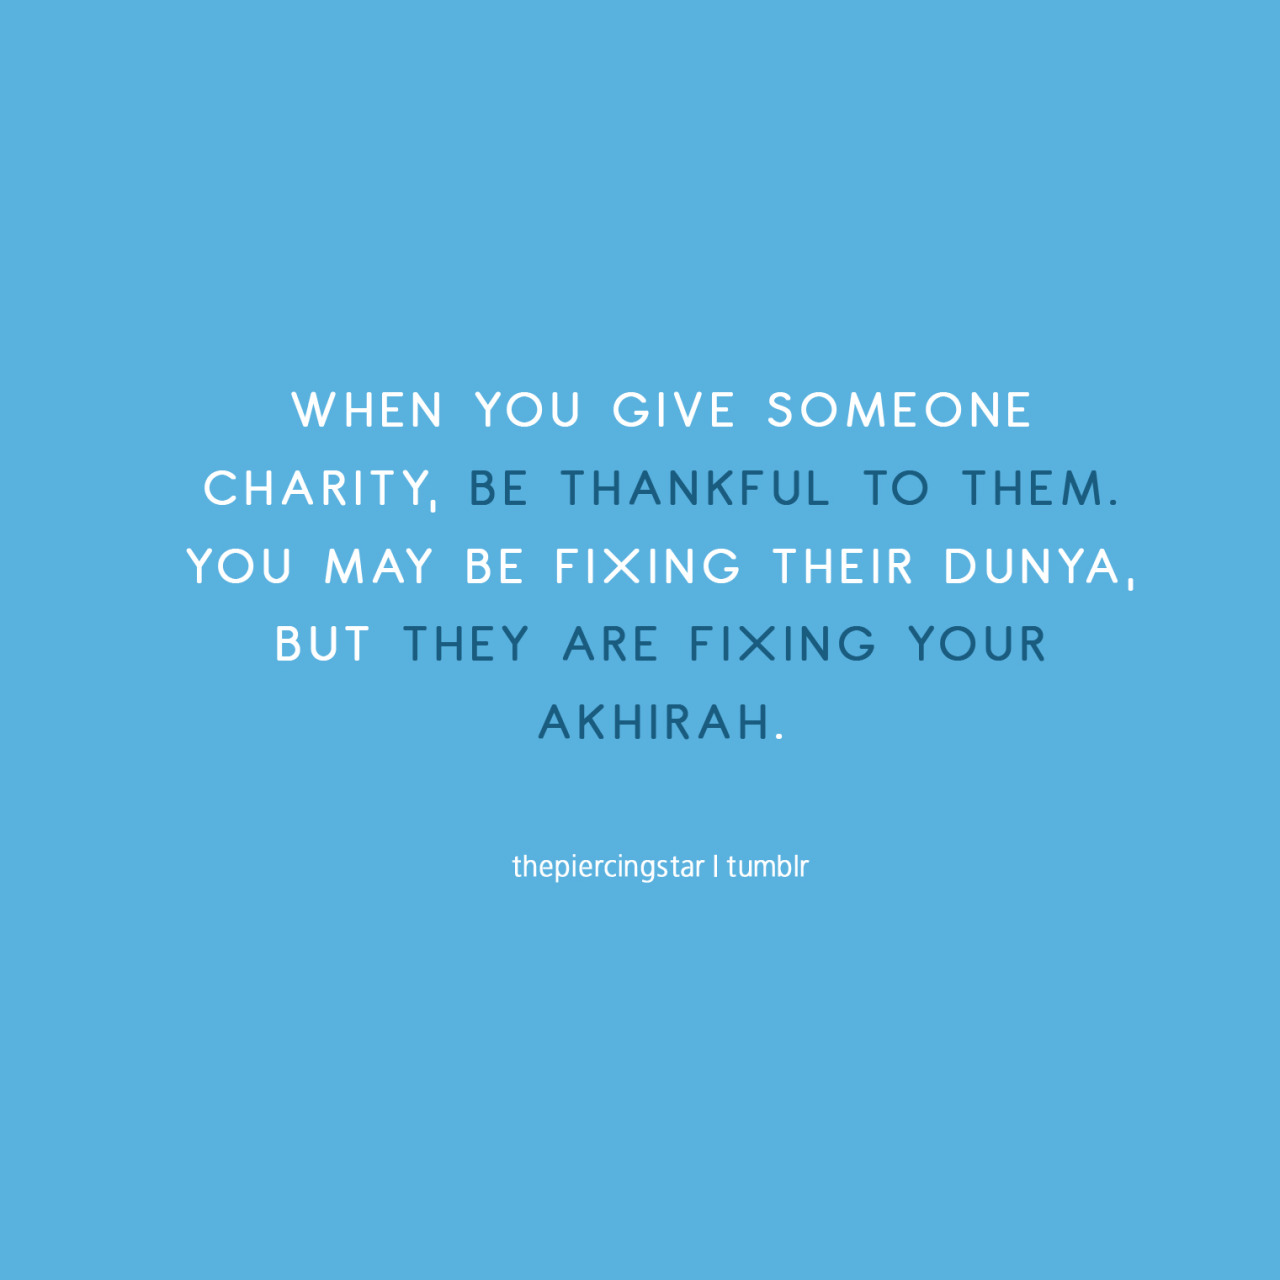 when you give someone charity, be thankful to them. you may be fixing their dunya, but they are fixing your akhirah